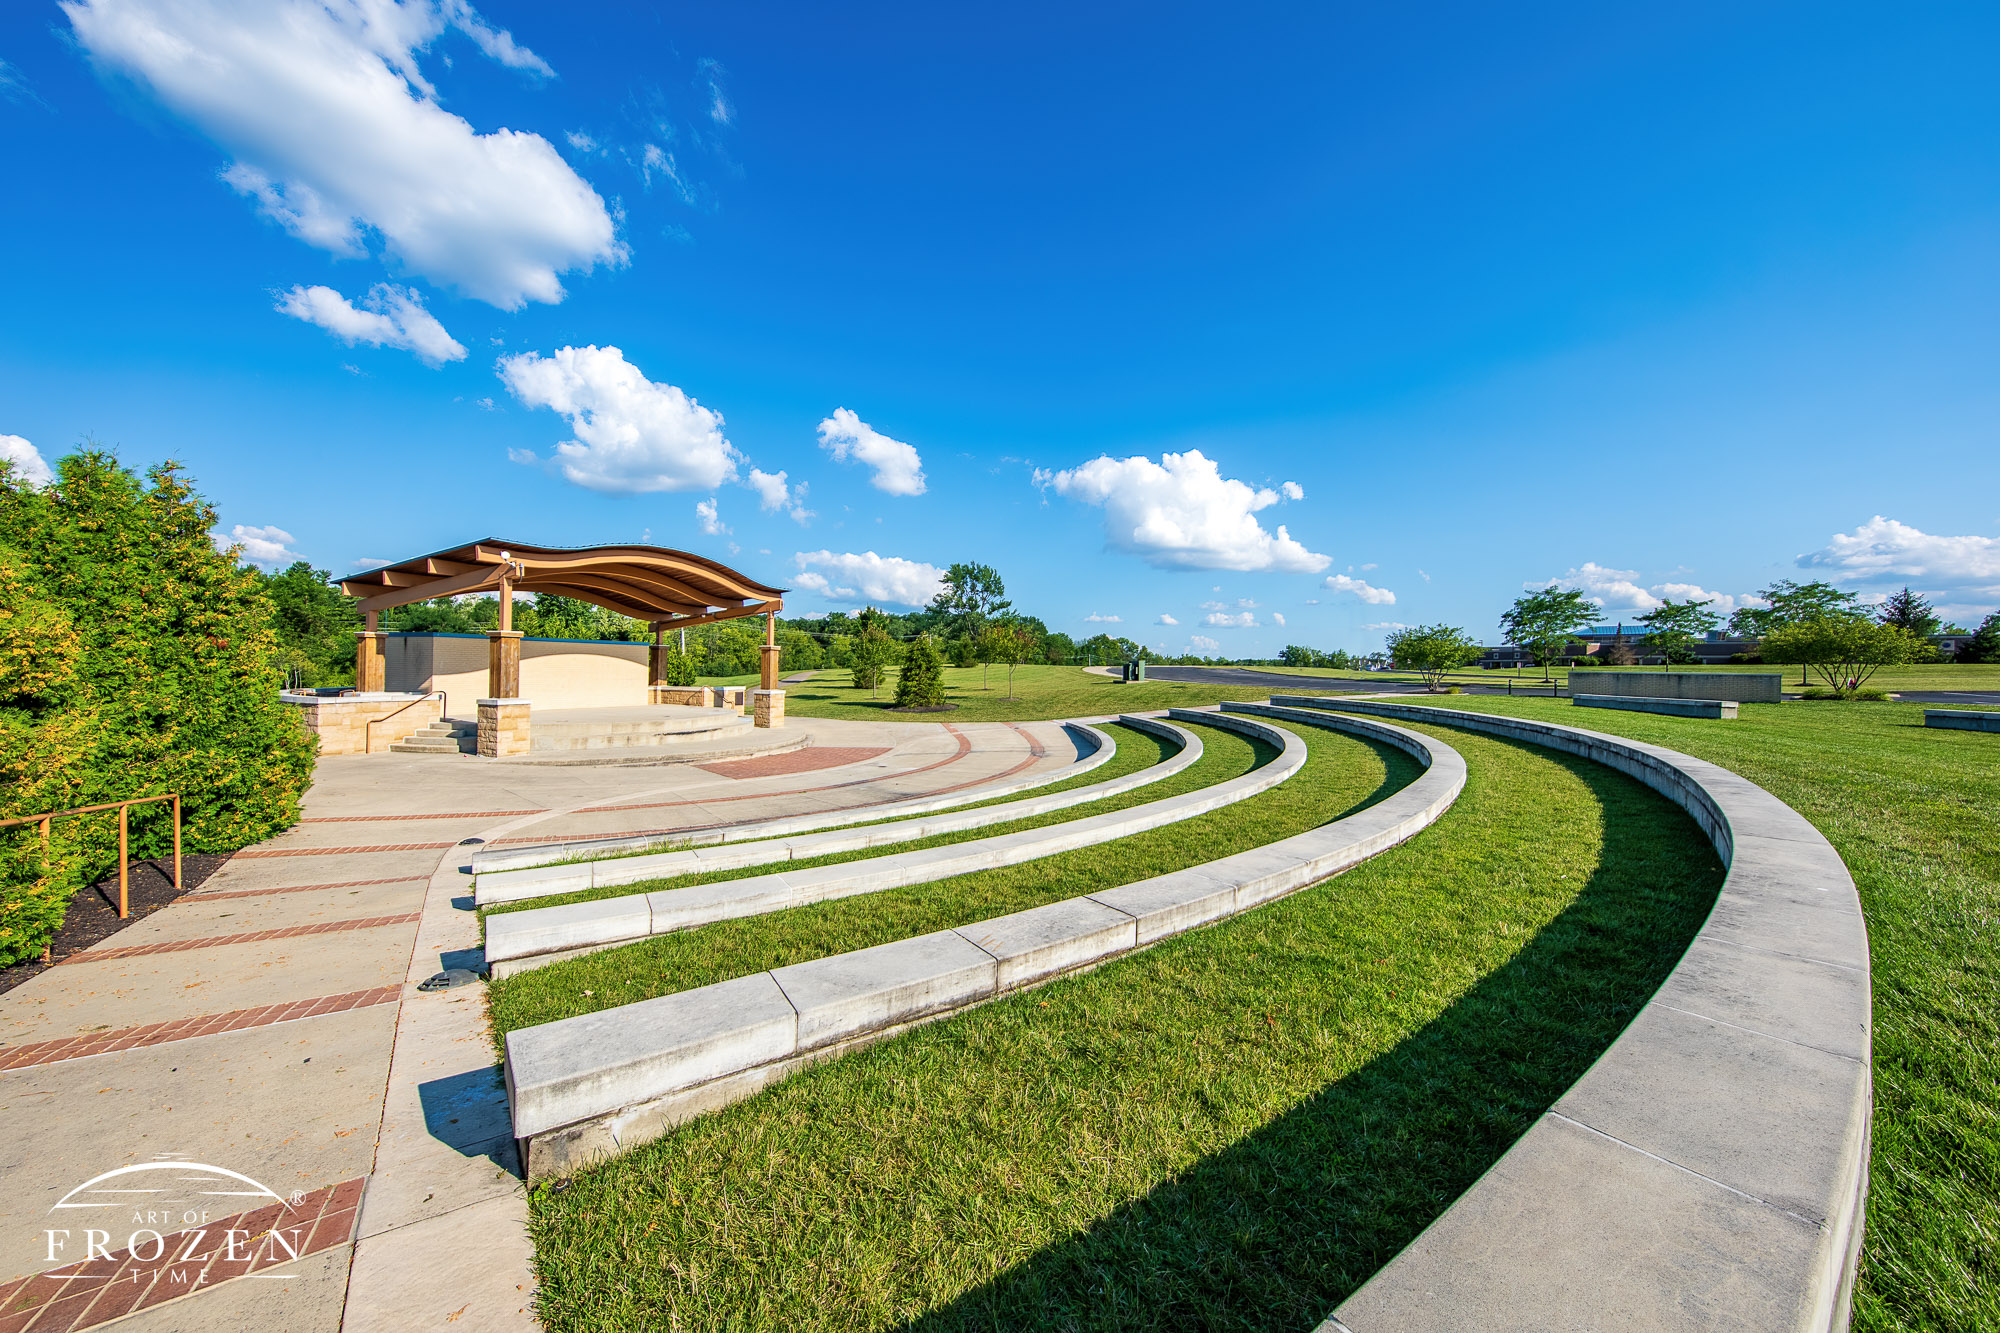 Concentric stone seating platforms arcing around the stage at Eichelberger Amphitheater as cumulous clouds float through the blue sky